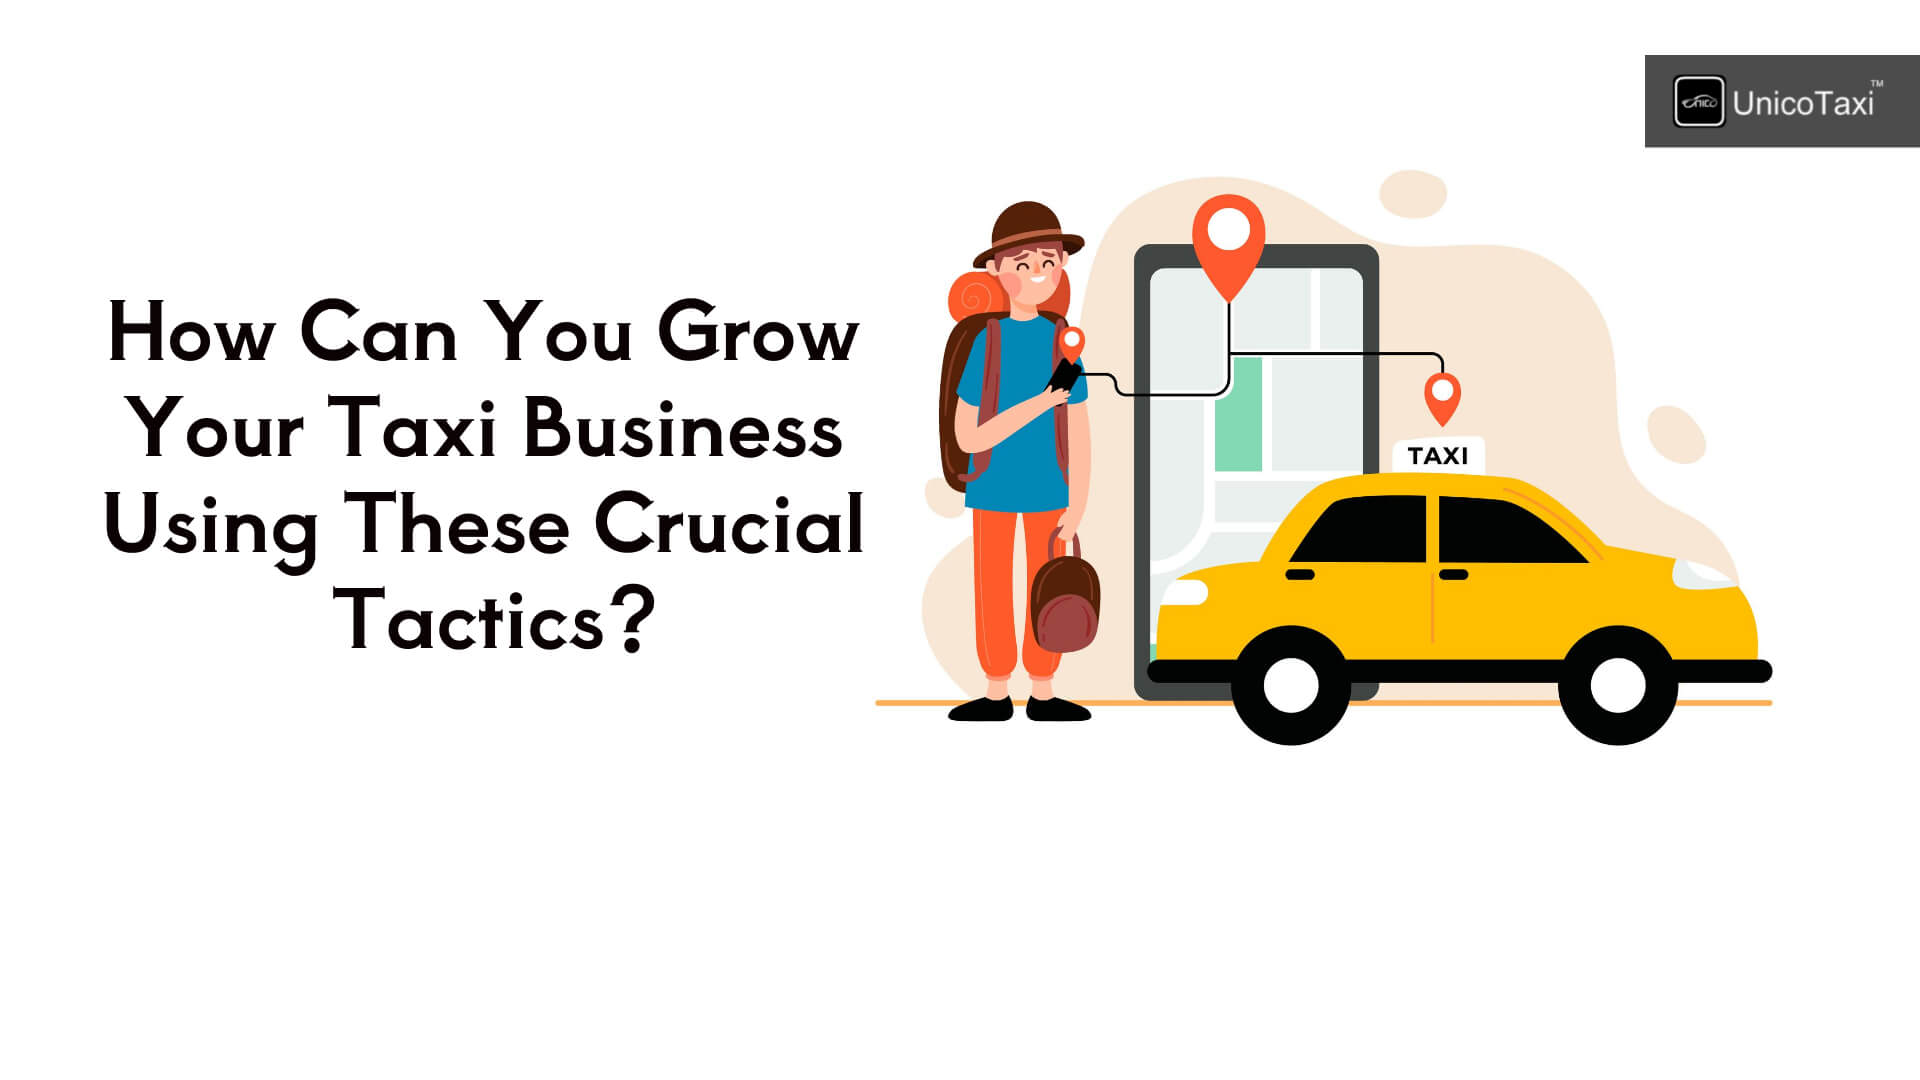 How Can You Grow Your Taxi Business Using These Crucial Tactics?